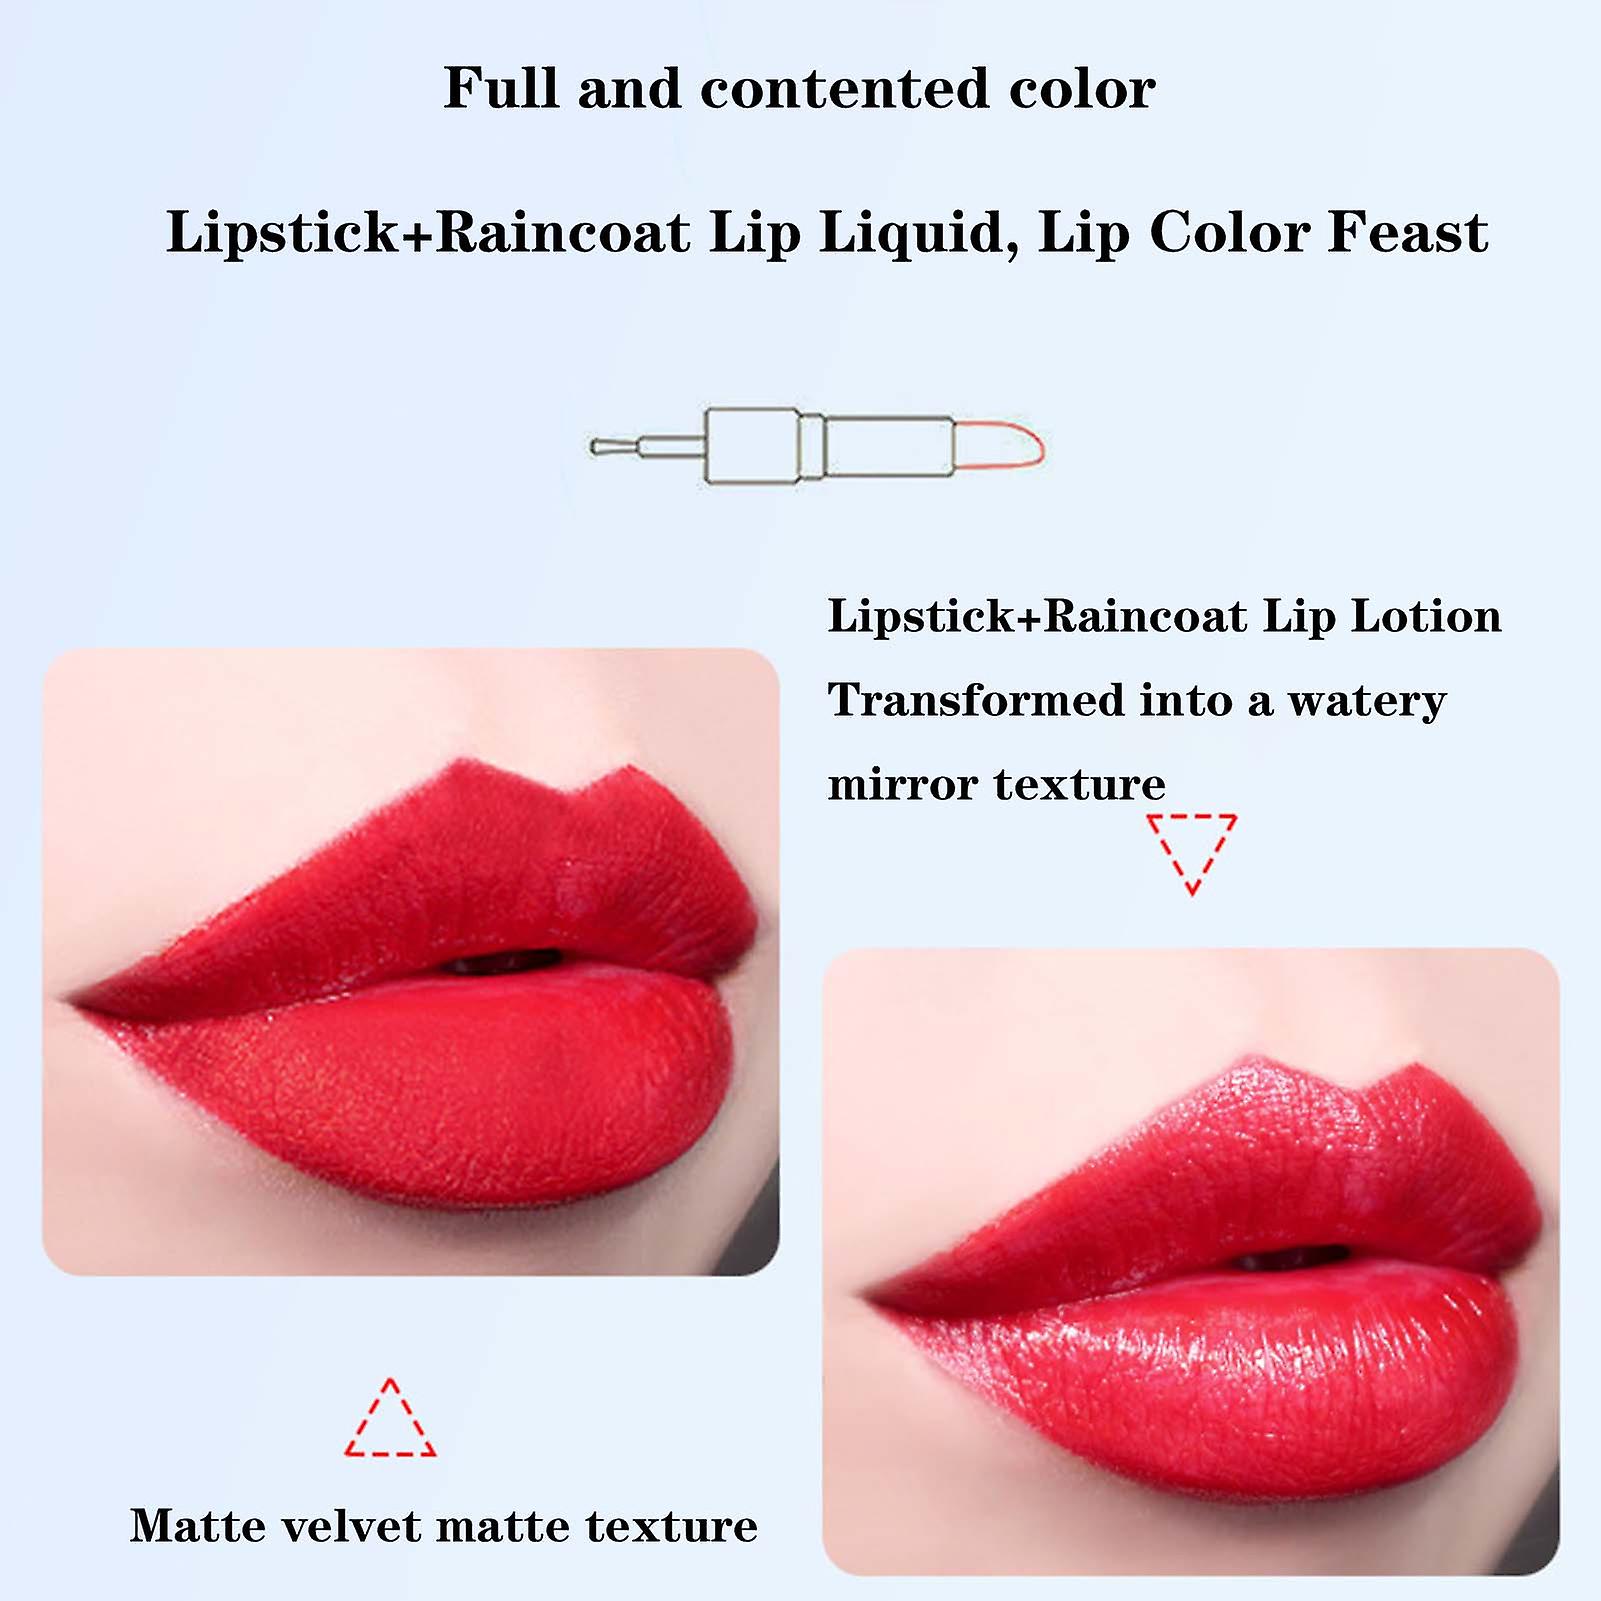 bill bannister recommends 2 lips tube pic